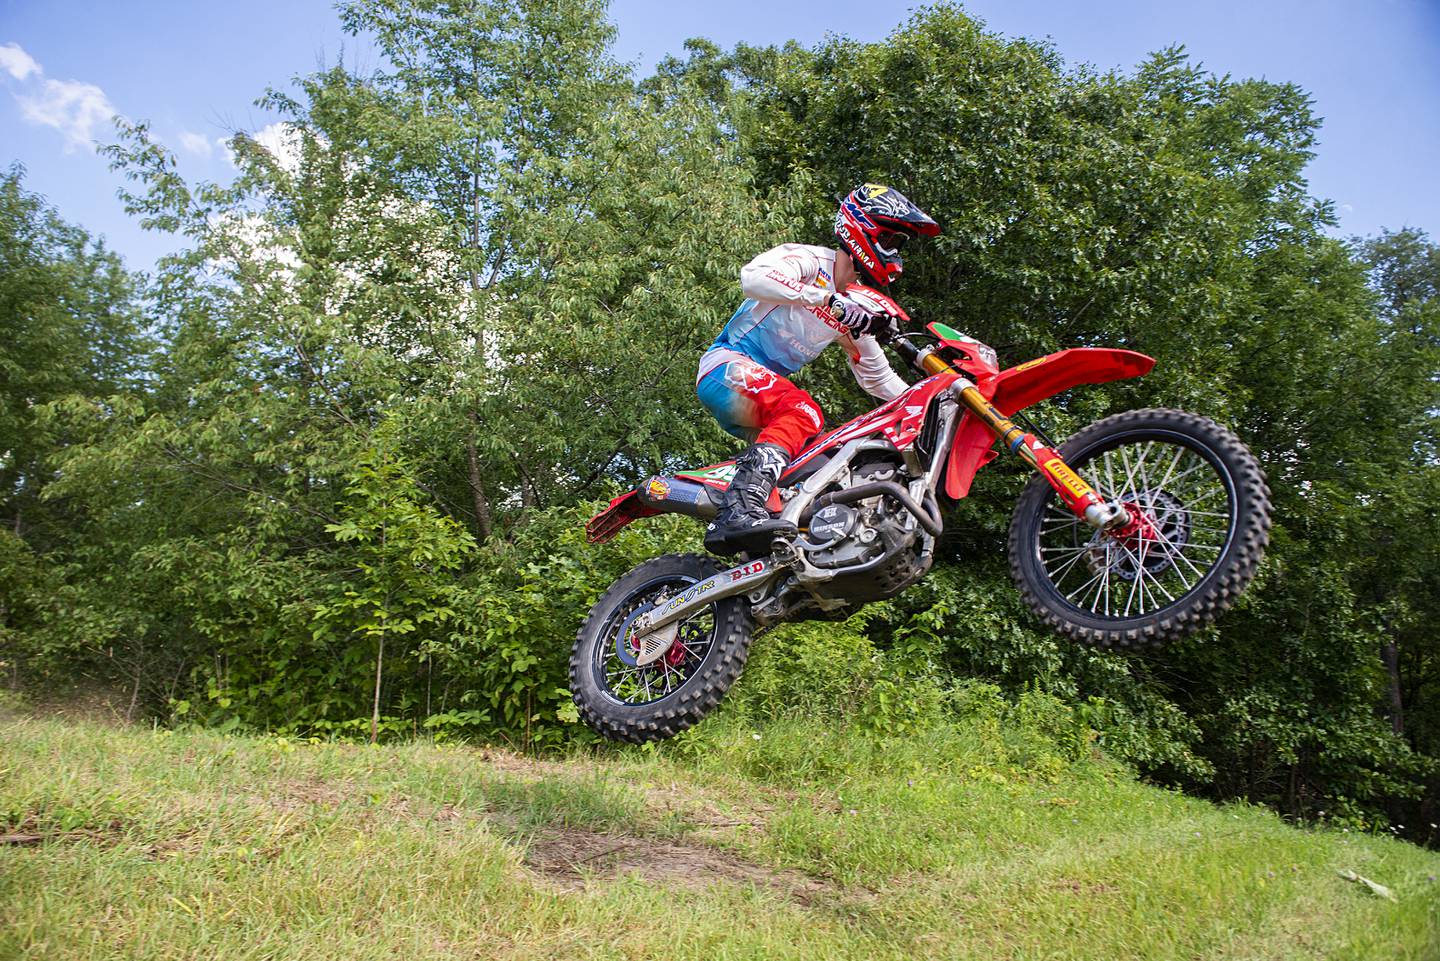 Cody Barnes soars over a hill while training on a course Thursday, August 4, 2022 near Fenton. Barnes will be traveling overseas later this month to participate in an international motocross competition.